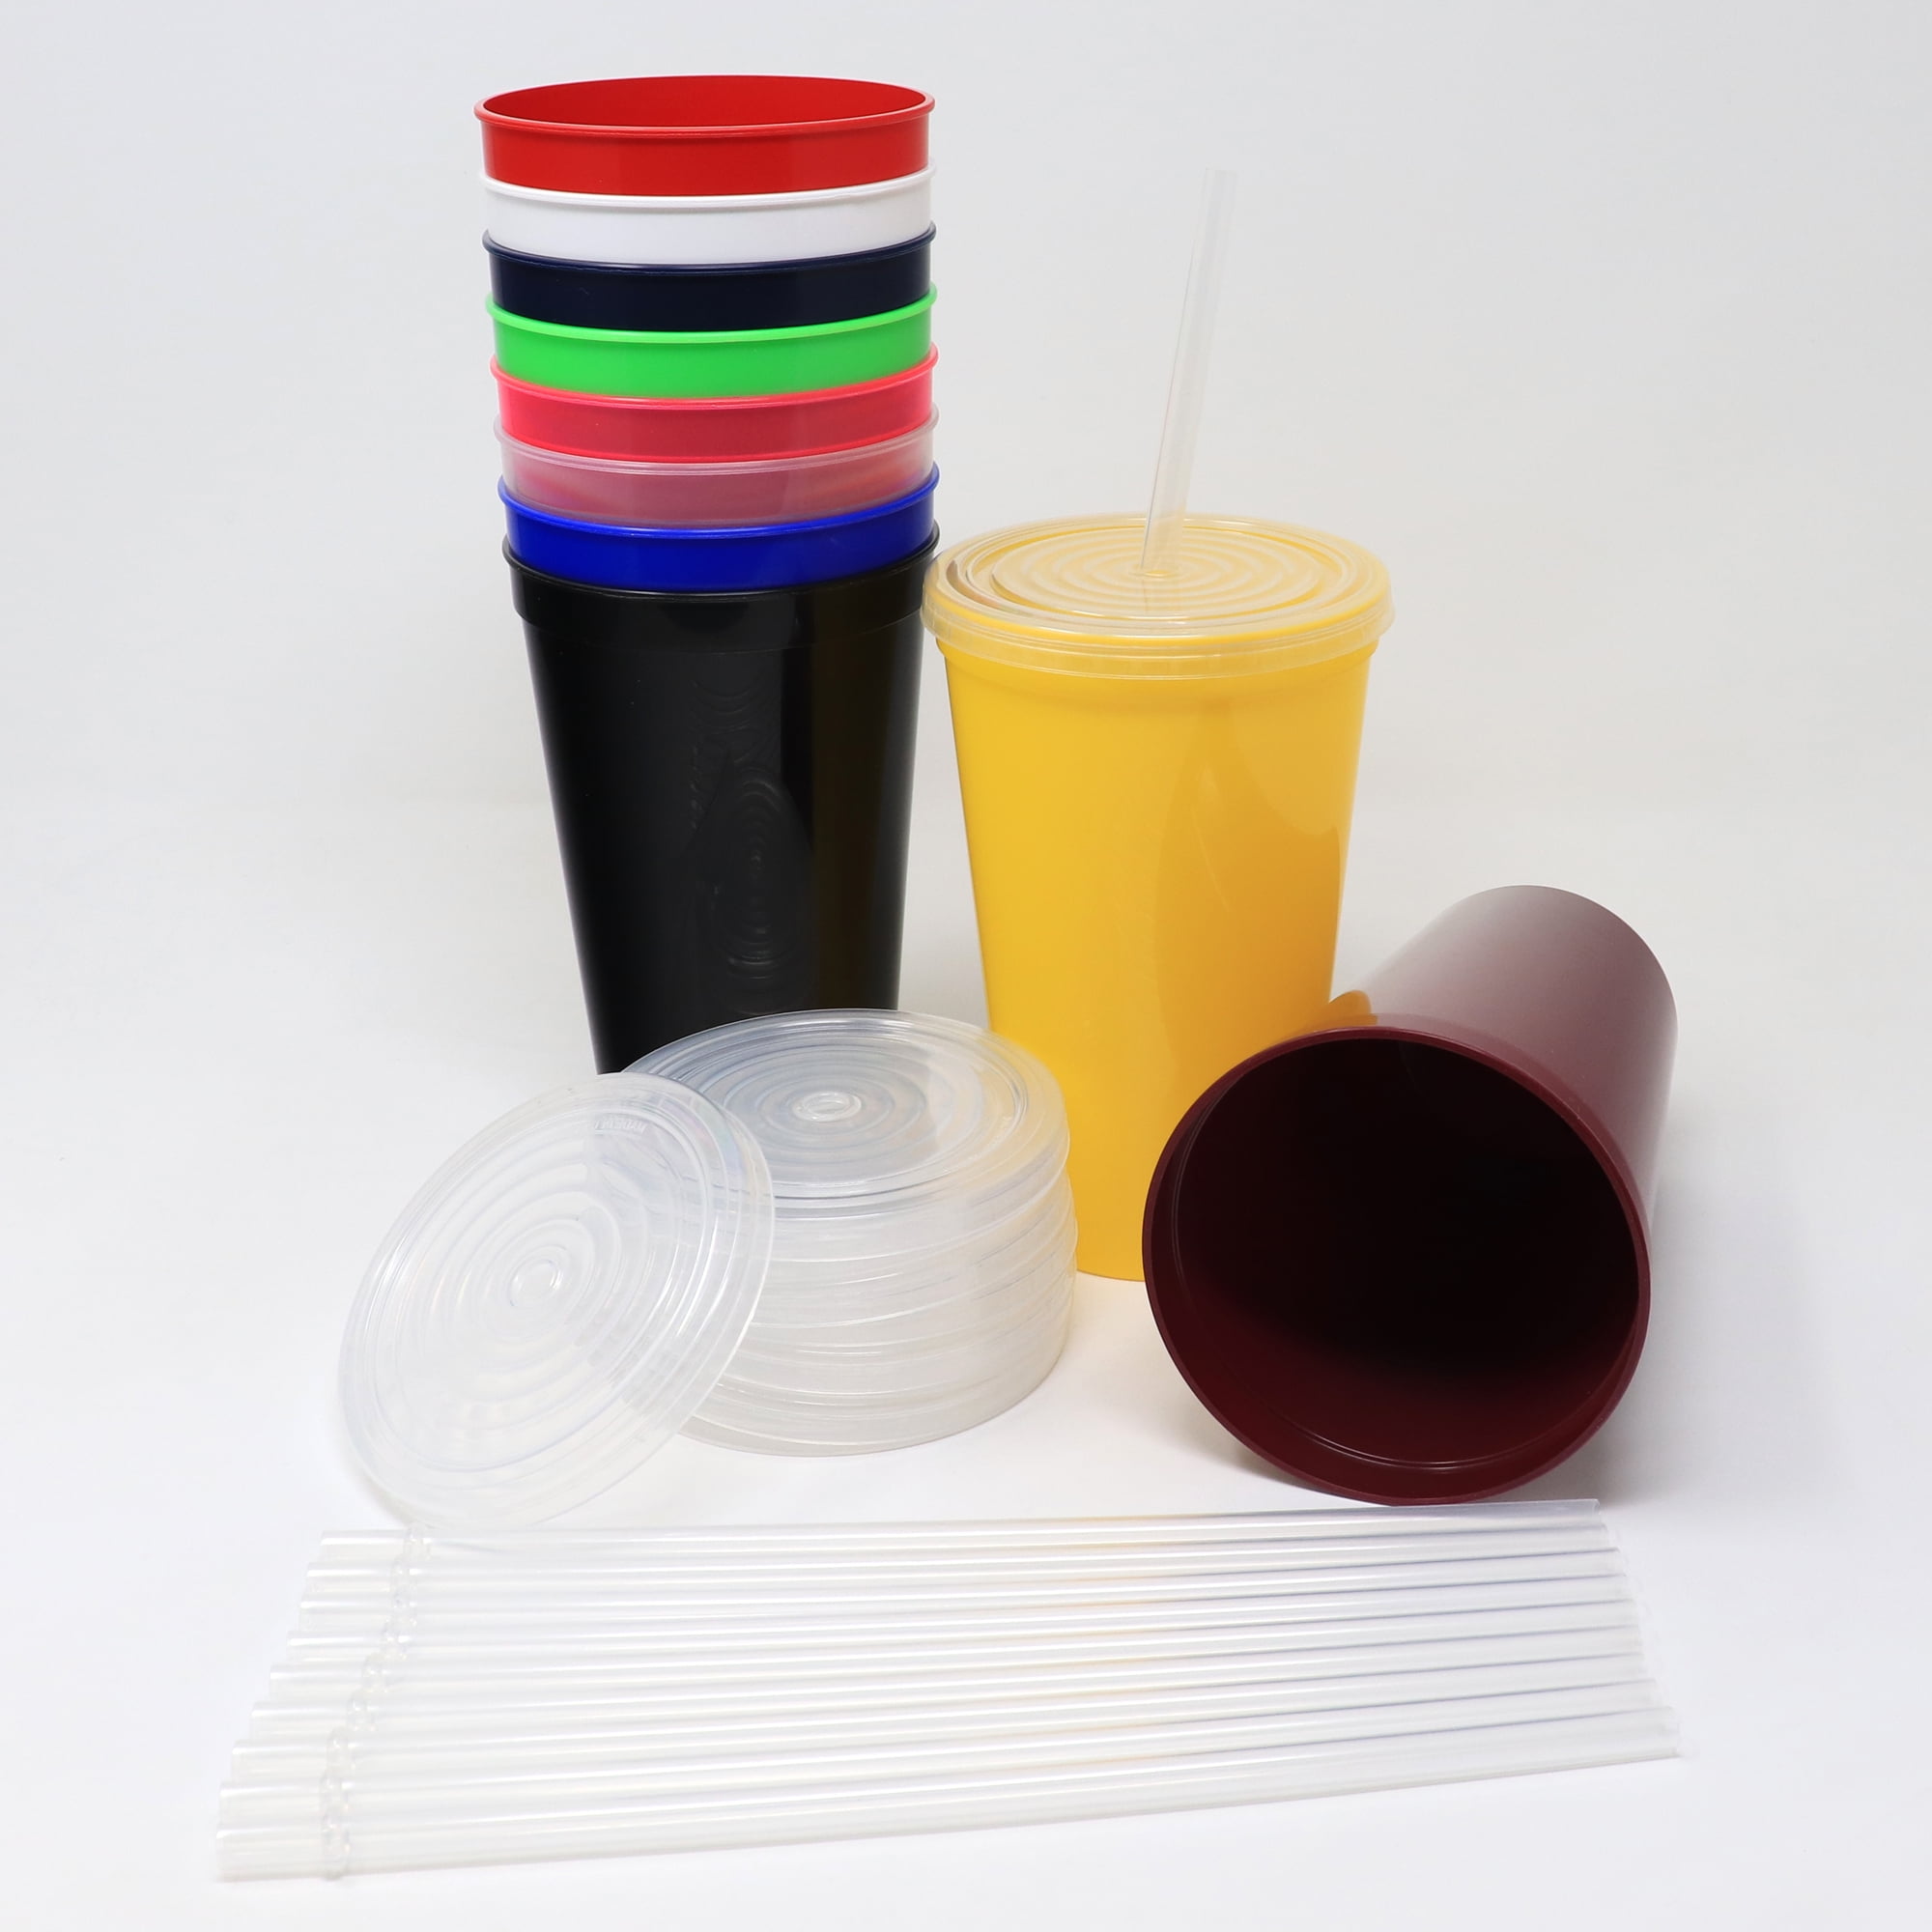 Rolling Sands 22 oz Reusable Plastic Cups with Lids, 10 Pack, USA